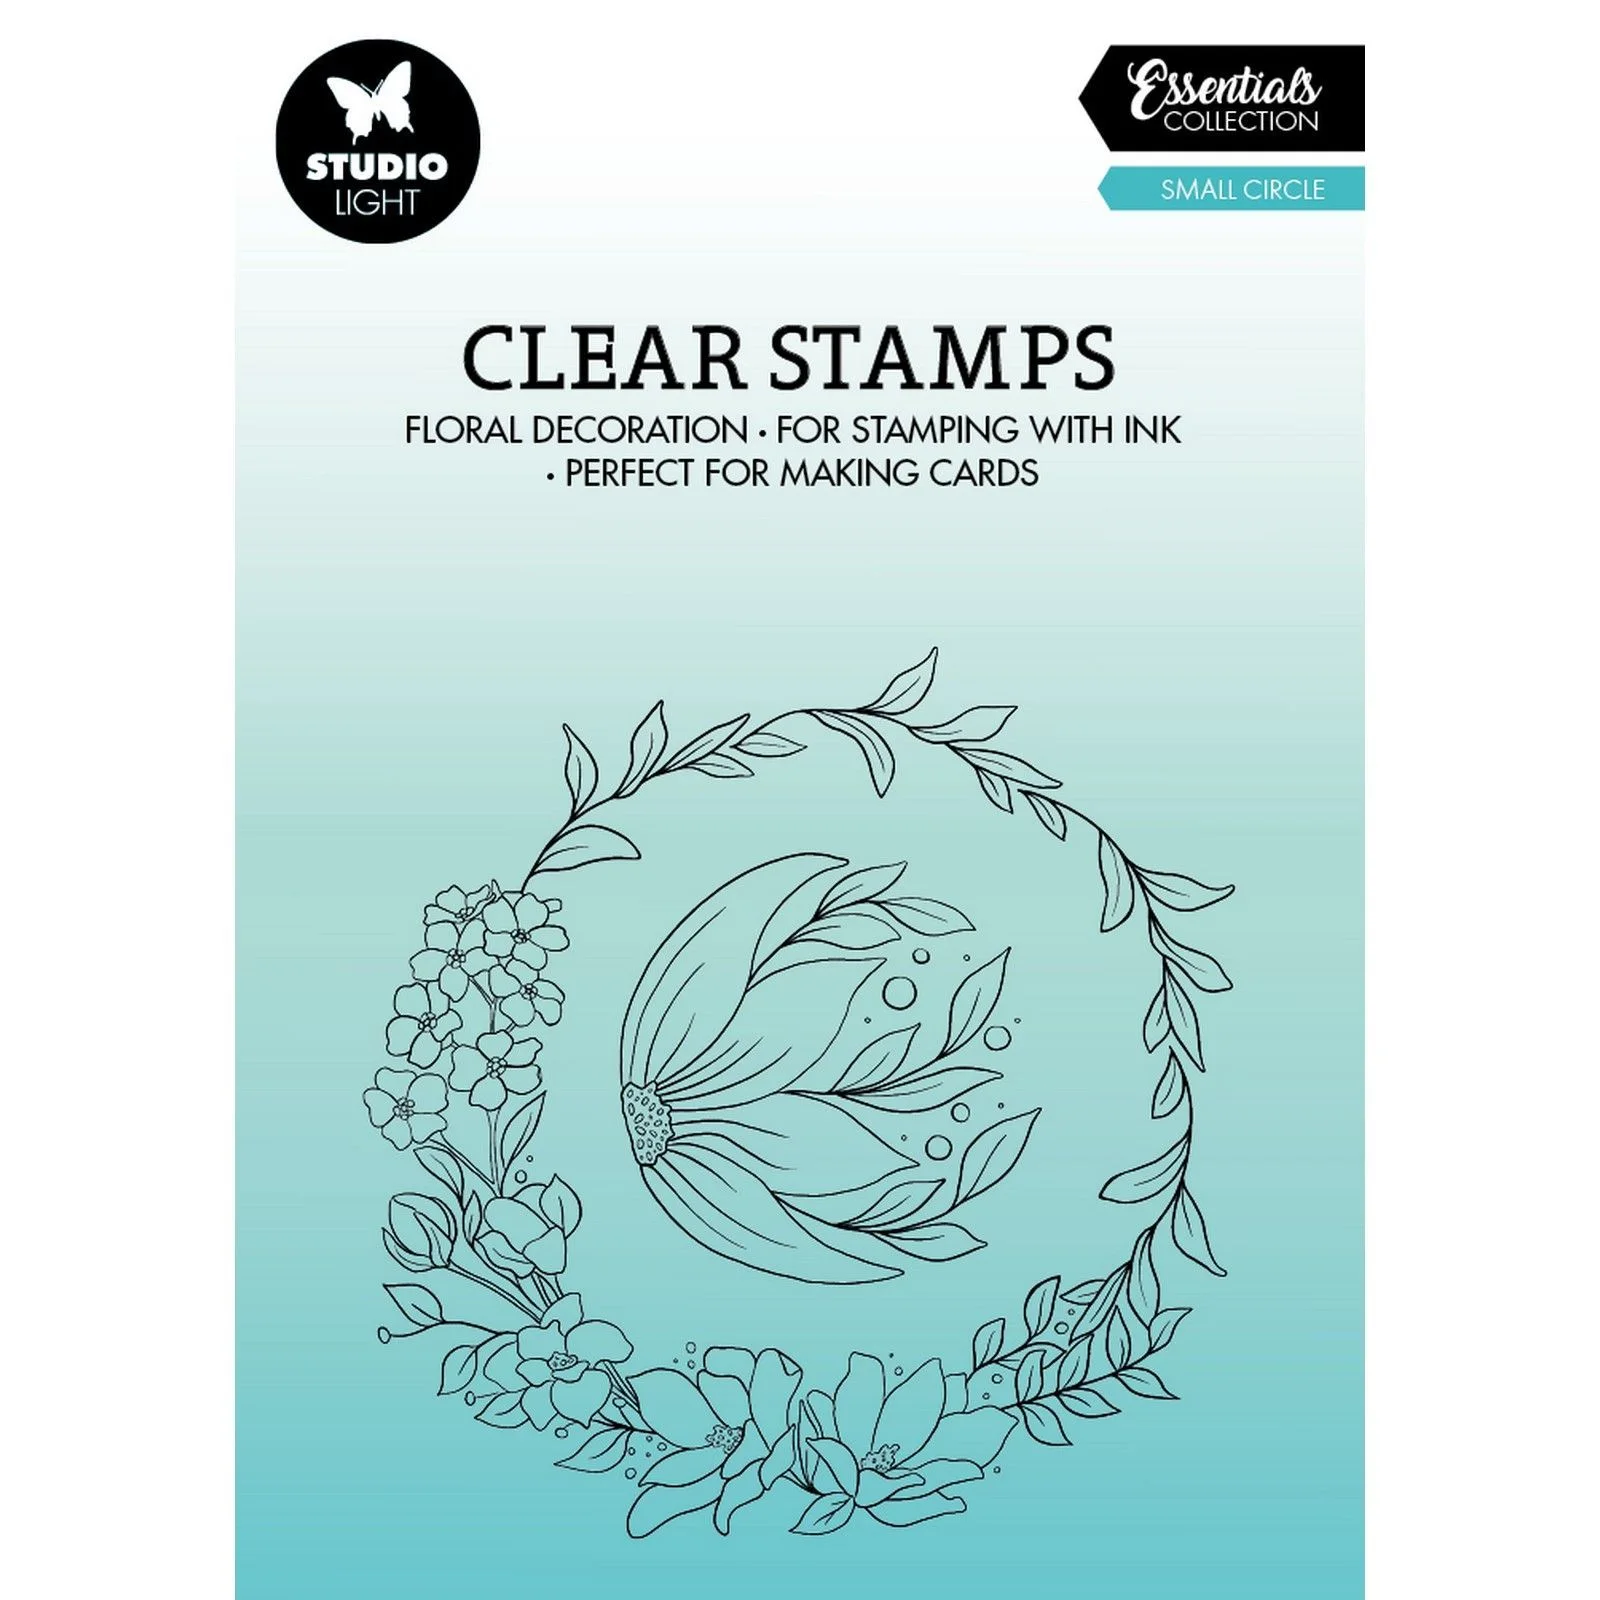 Clearstamp Set Small Circle